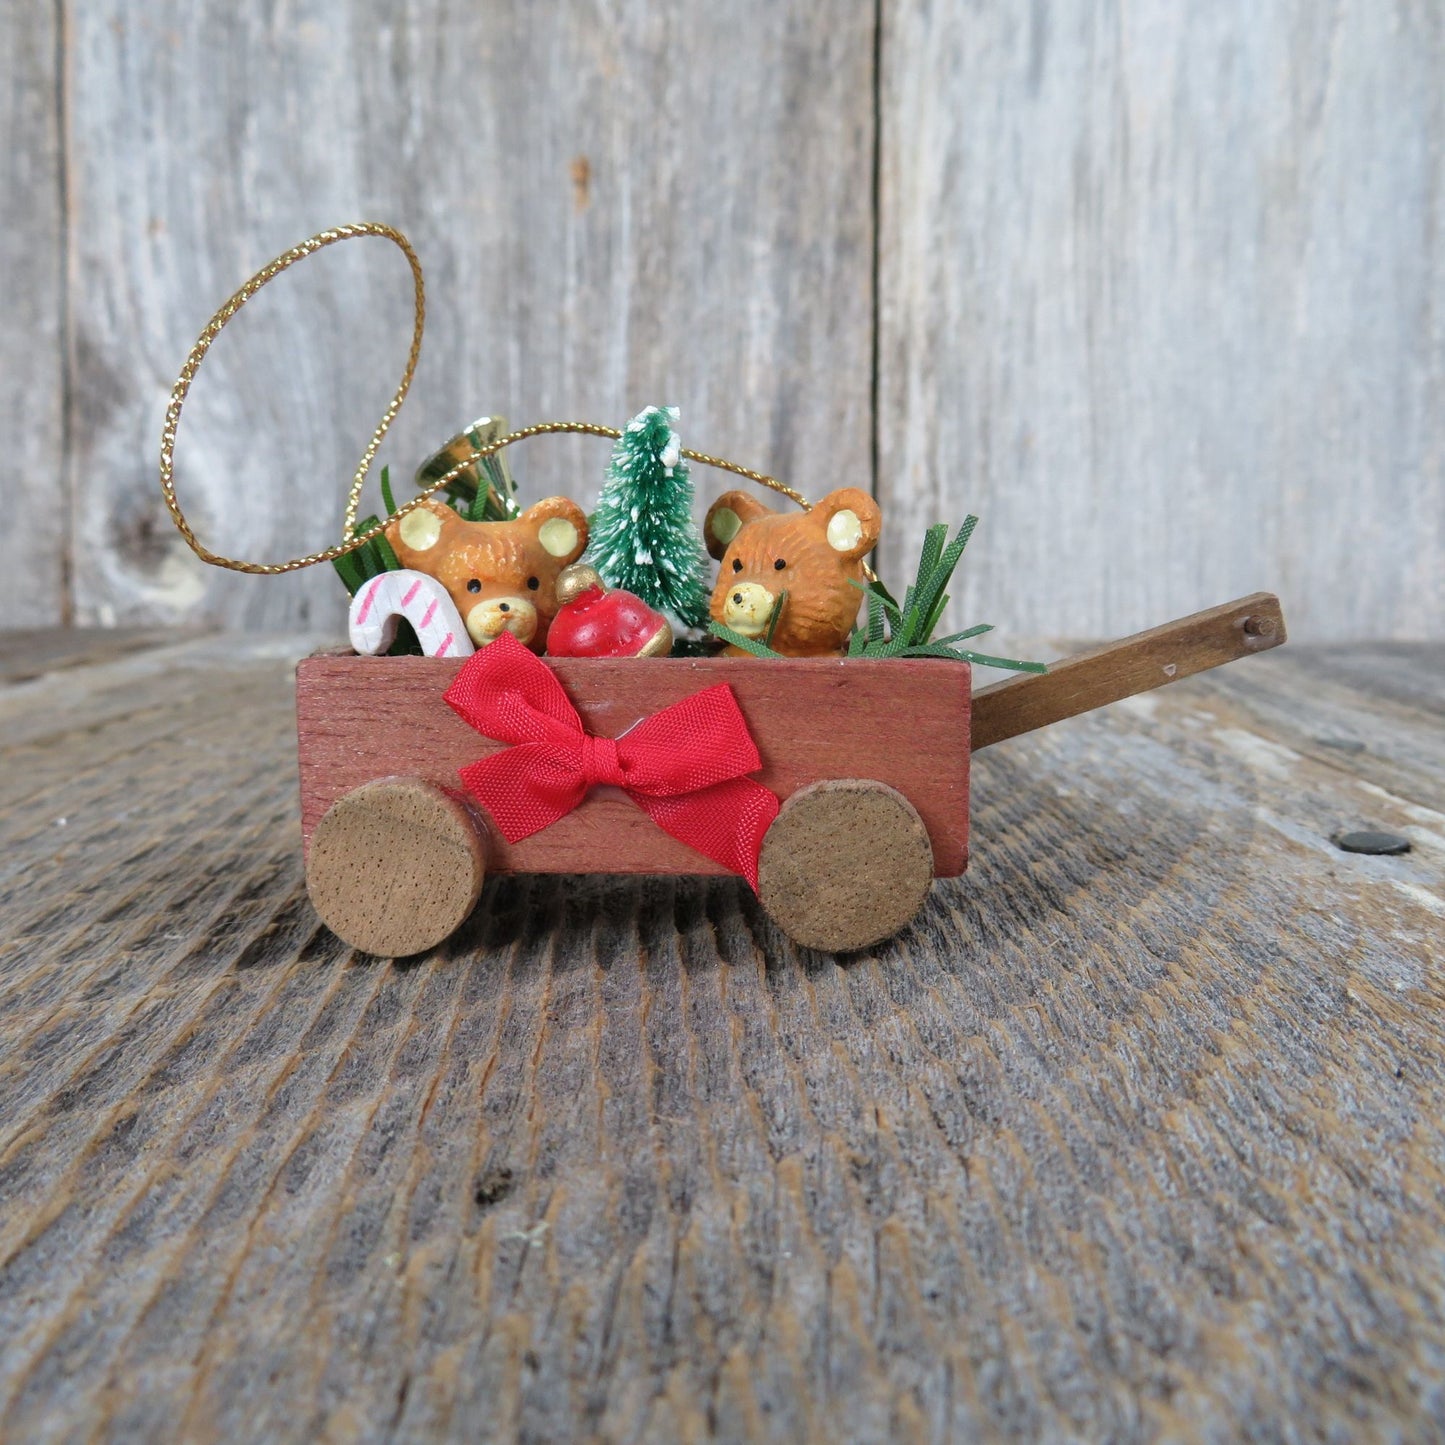 Vintage Wooden Wagon with Teddy Bears Ornament Wood Christmas Red Brush Tree Trumpet